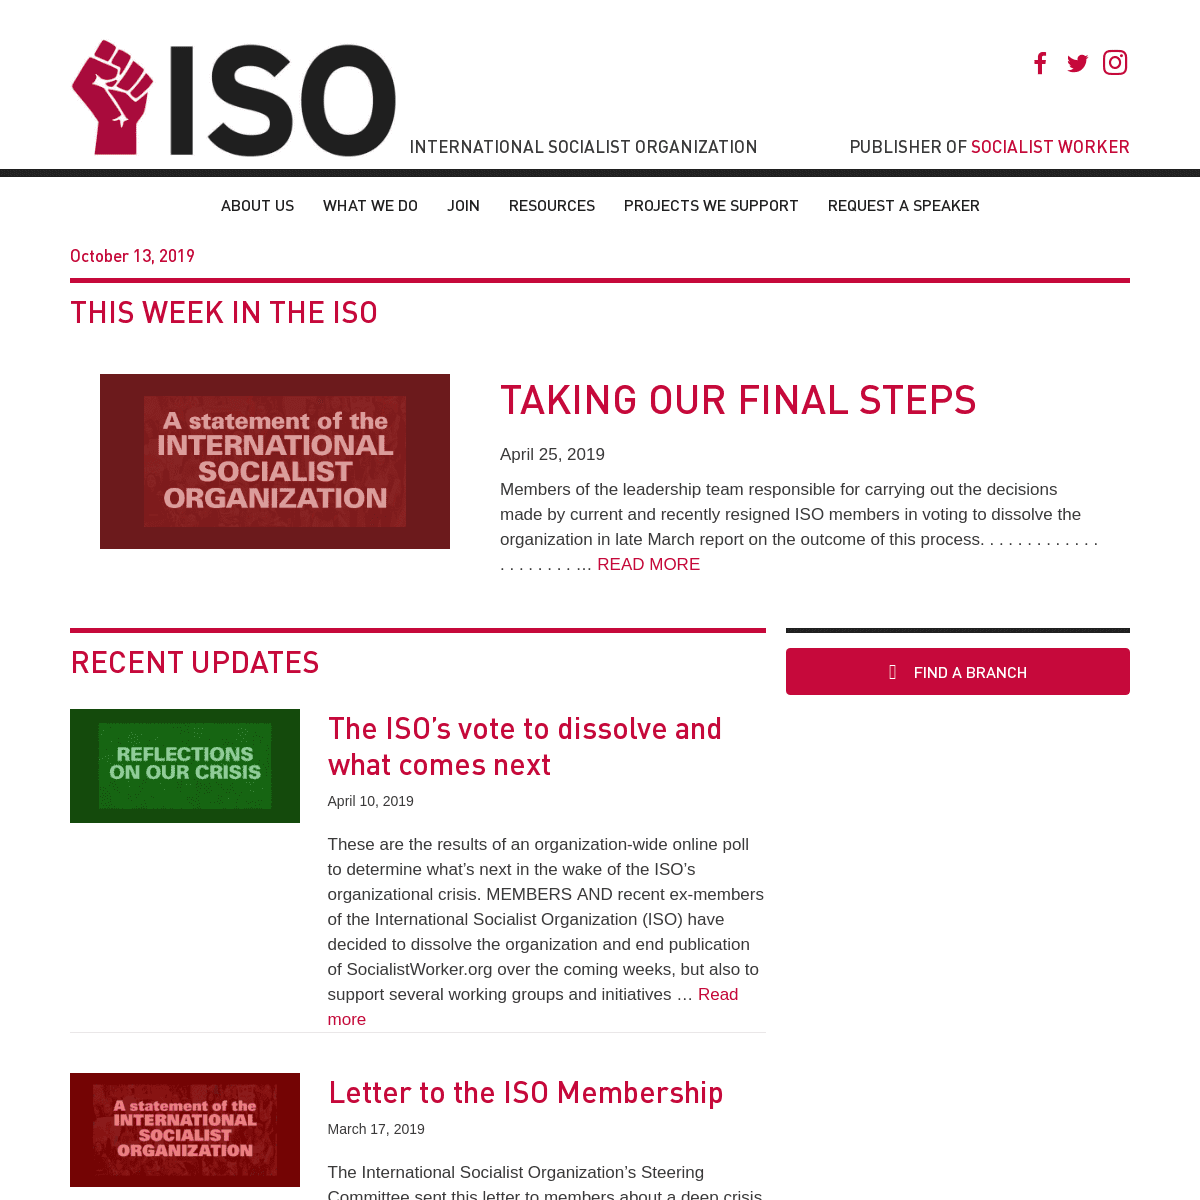 A complete backup of internationalsocialist.org